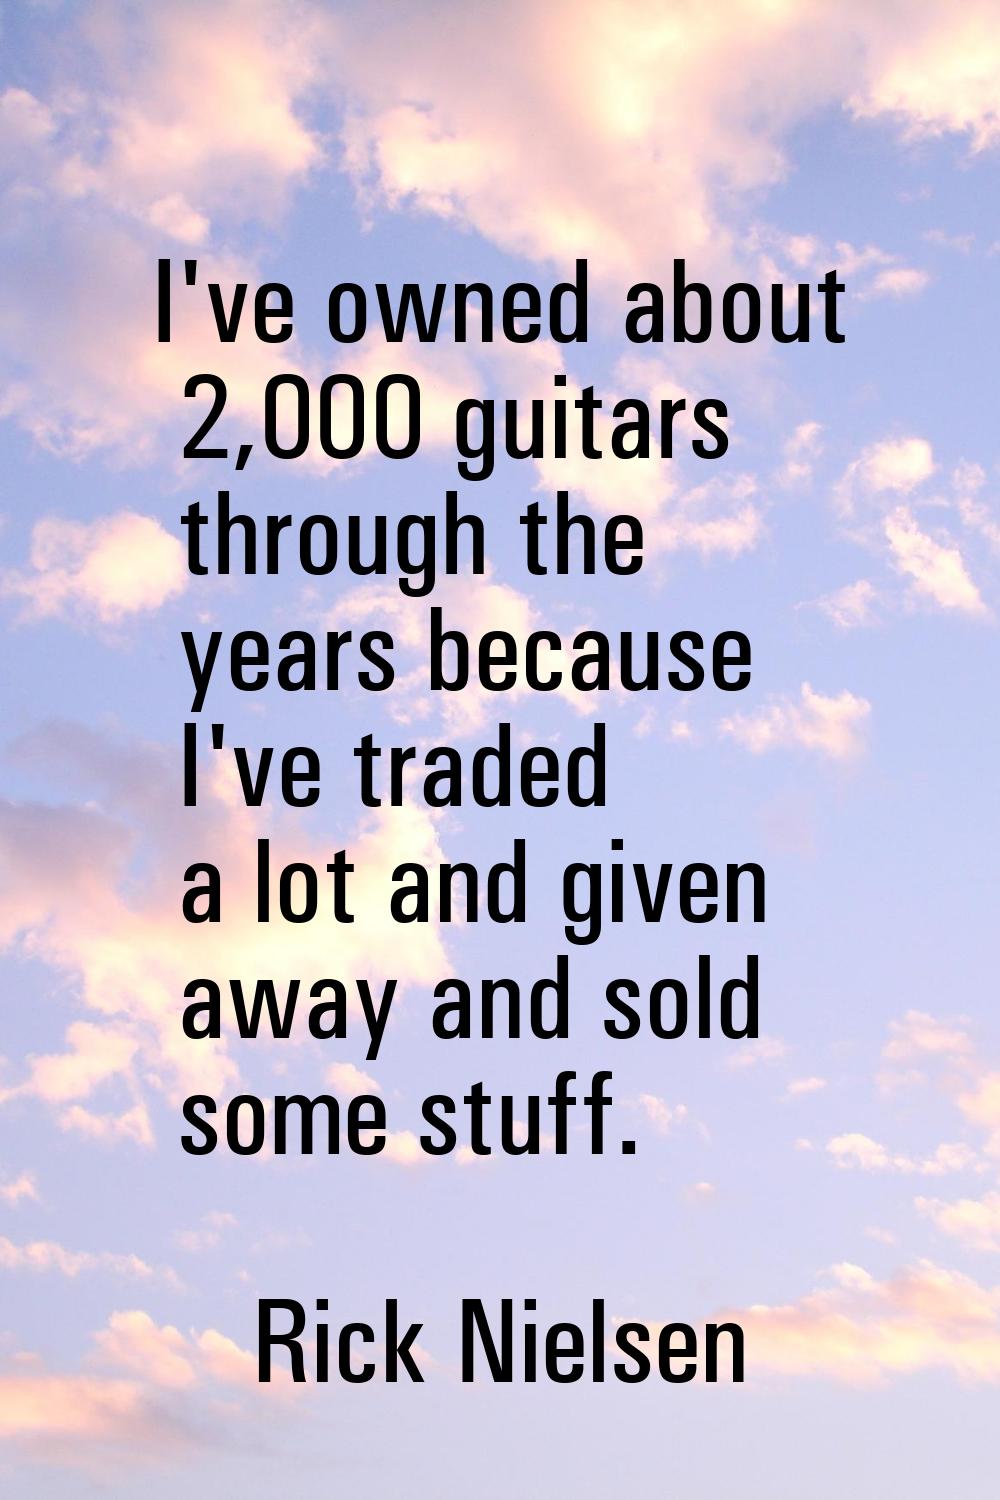 I've owned about 2,000 guitars through the years because I've traded a lot and given away and sold 